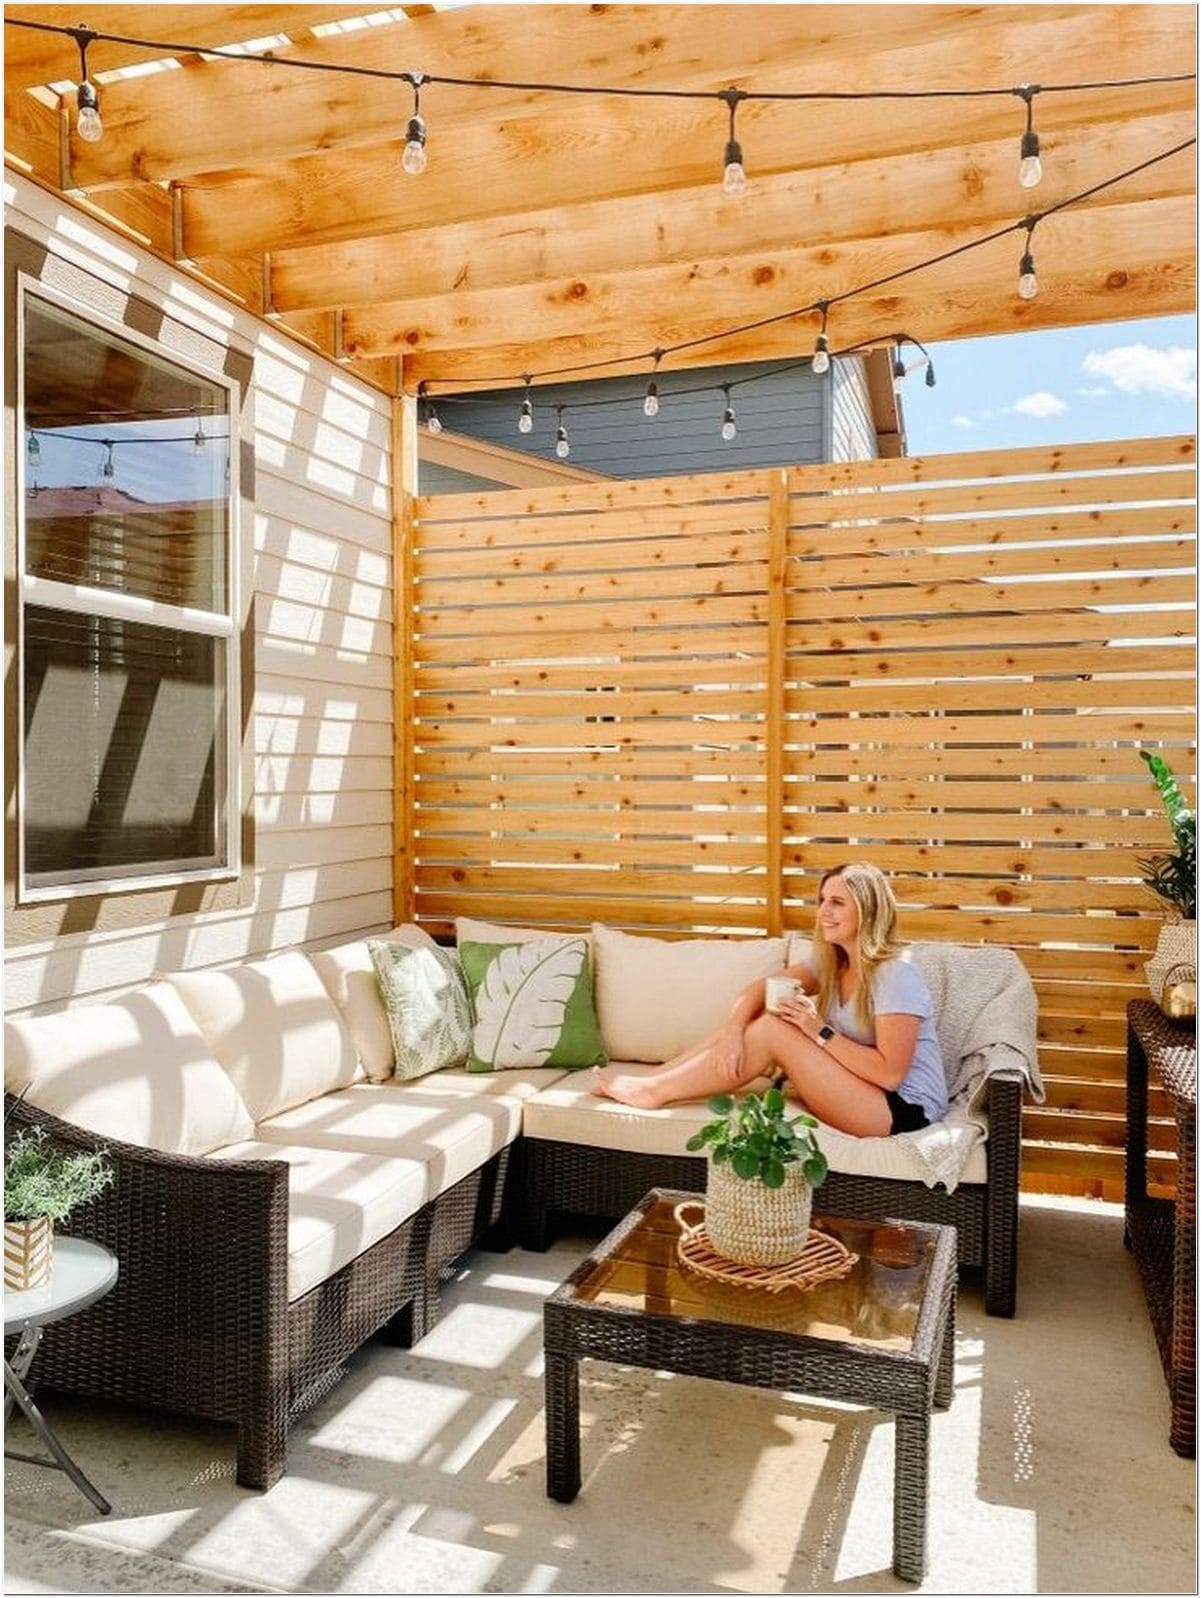 25 fabulous ideas to turn patios into inviting outdoor spaces - 87